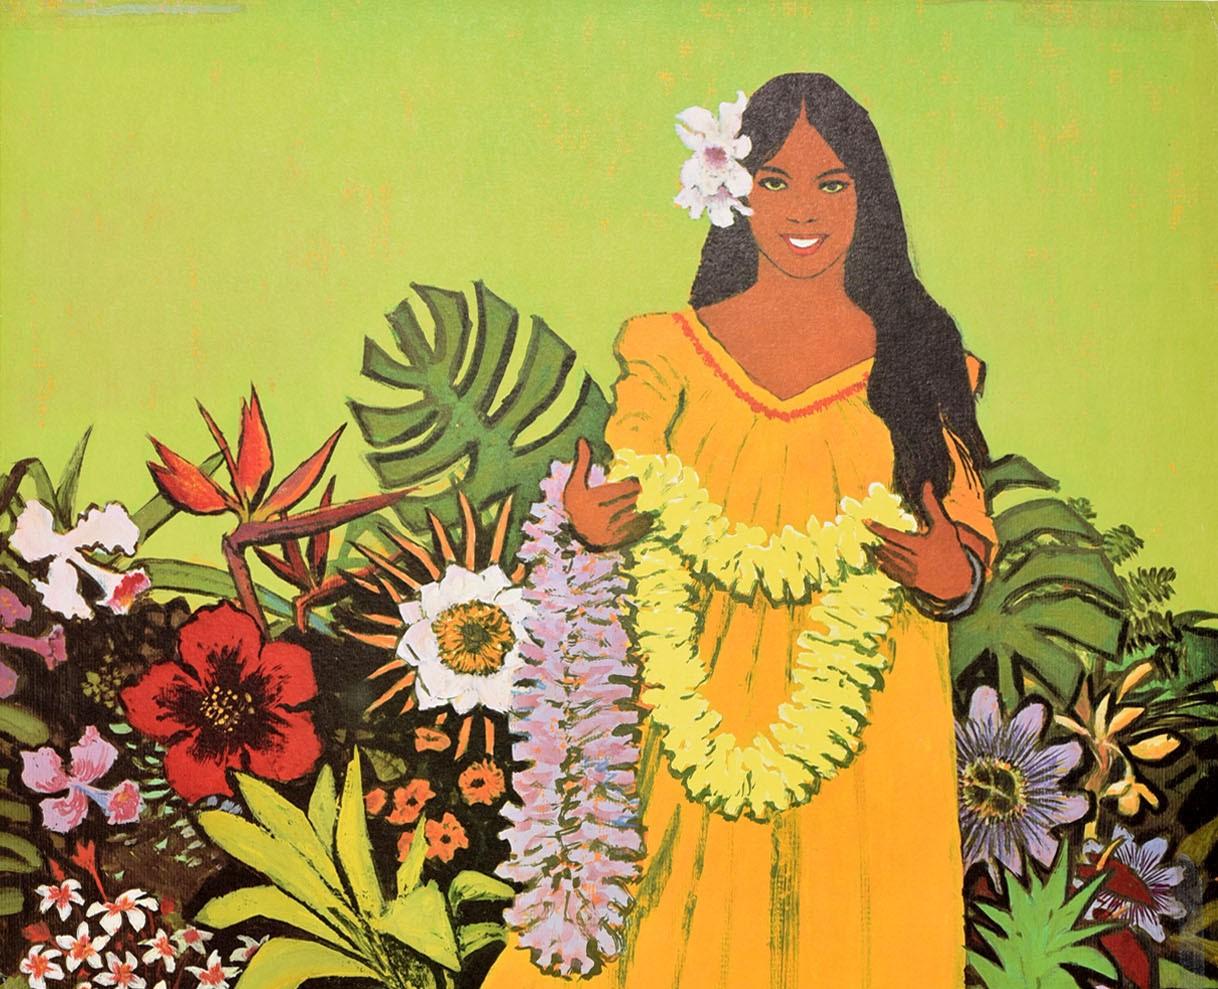 Original vintage aviation travel poster for United Air Lines Hawaii featuring a colourful design of a smiling lady welcoming the viewer as a visitor to the island offering a Lei garland of flowers with more flowers, tropical leaves, pineapple and